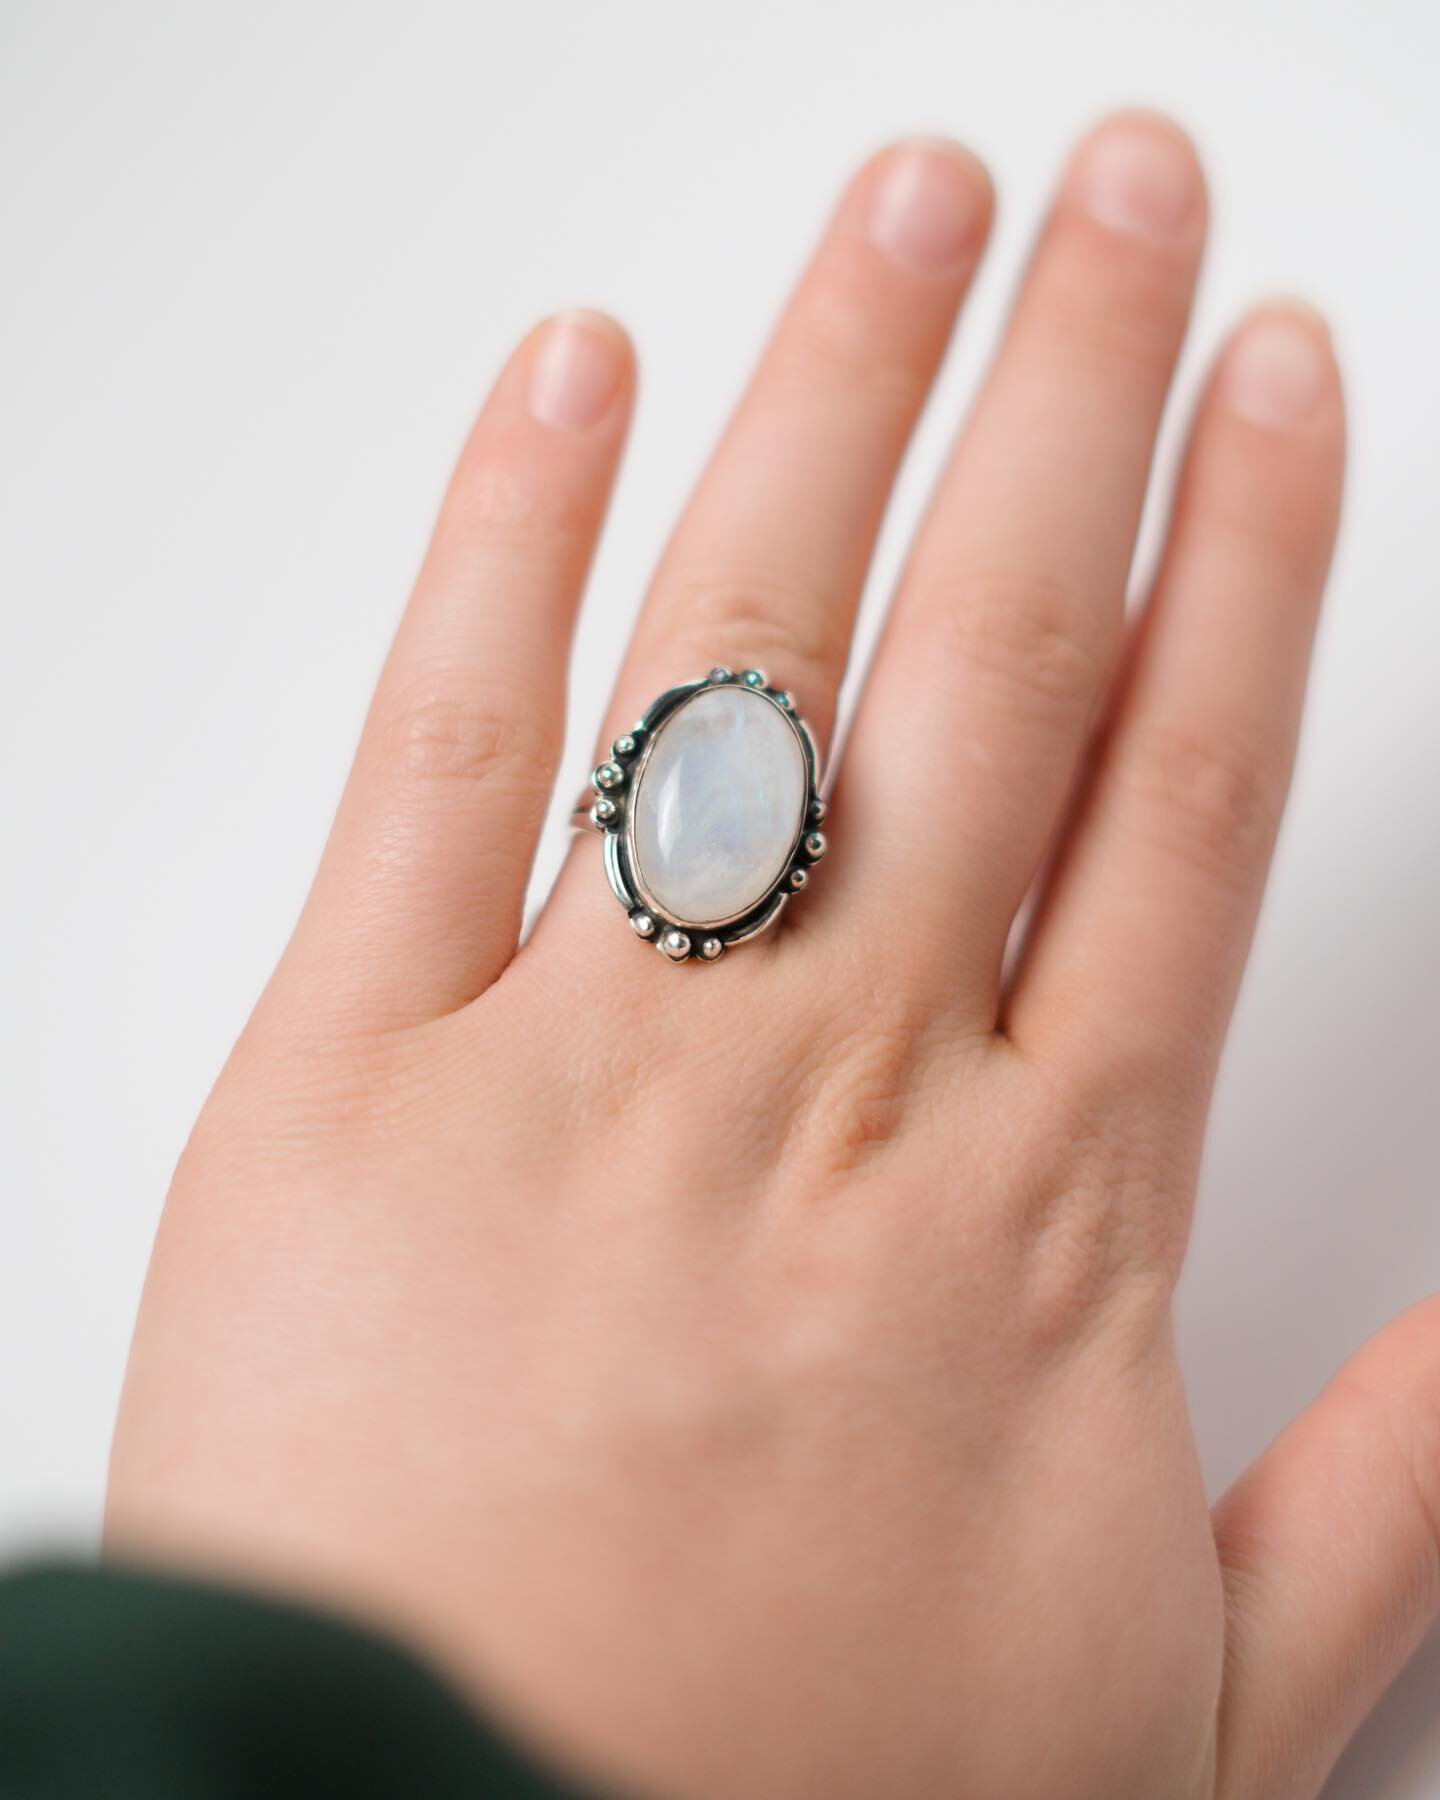 Rainbow moonstone is one of the most timeless stones. Goes well with every outfit🤍

#moonstones #rainbowmoonstone #sterlingsilver